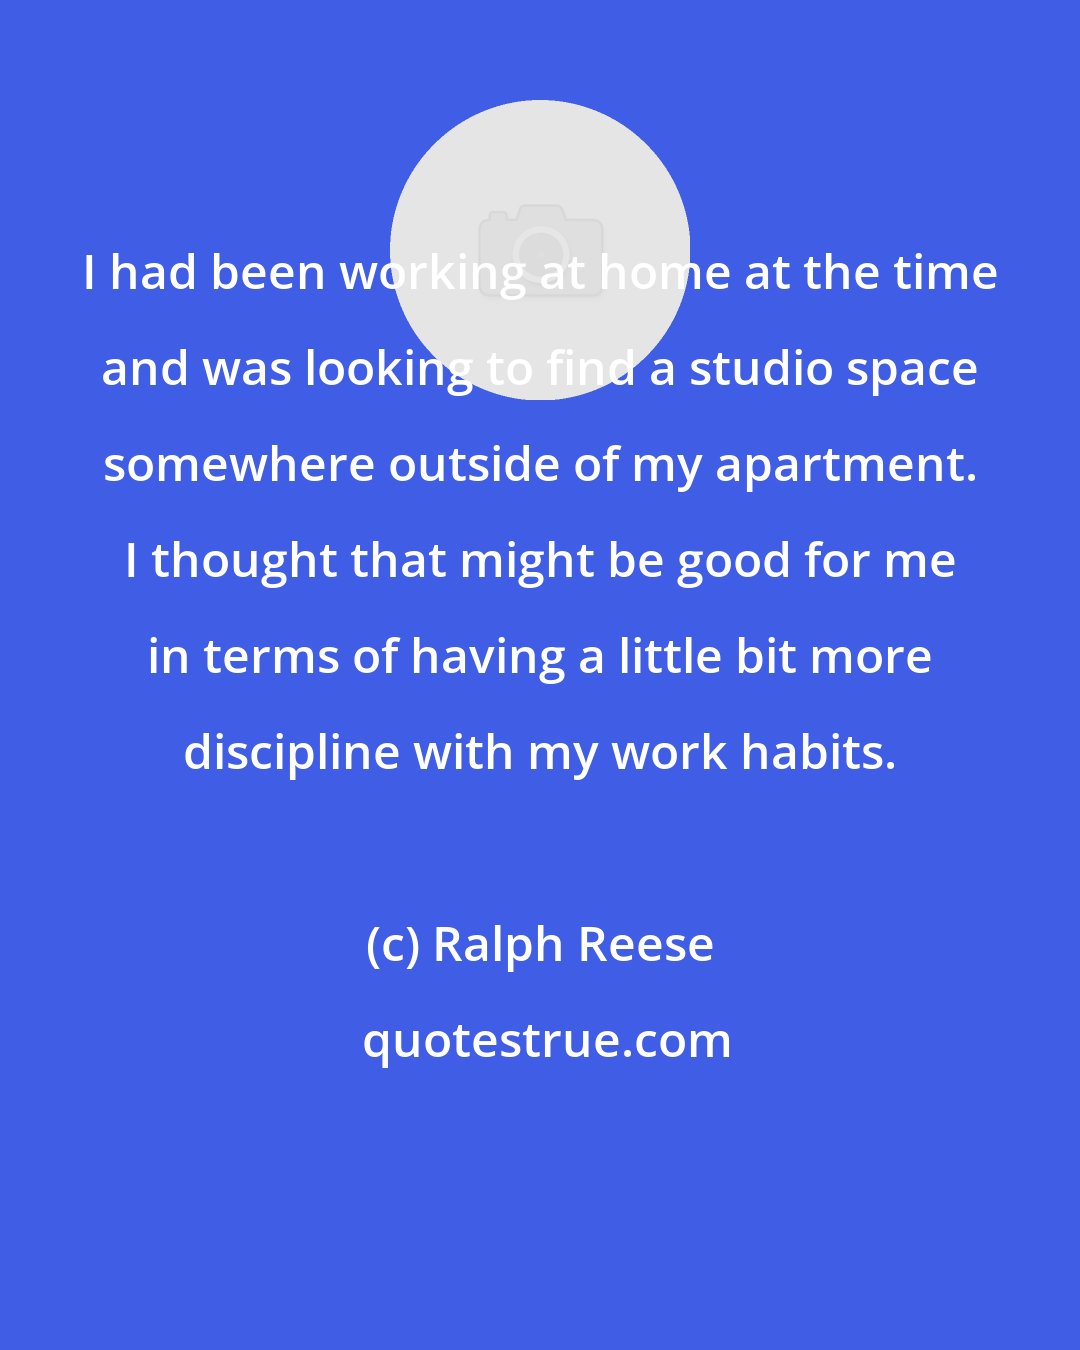 Ralph Reese: I had been working at home at the time and was looking to find a studio space somewhere outside of my apartment. I thought that might be good for me in terms of having a little bit more discipline with my work habits.